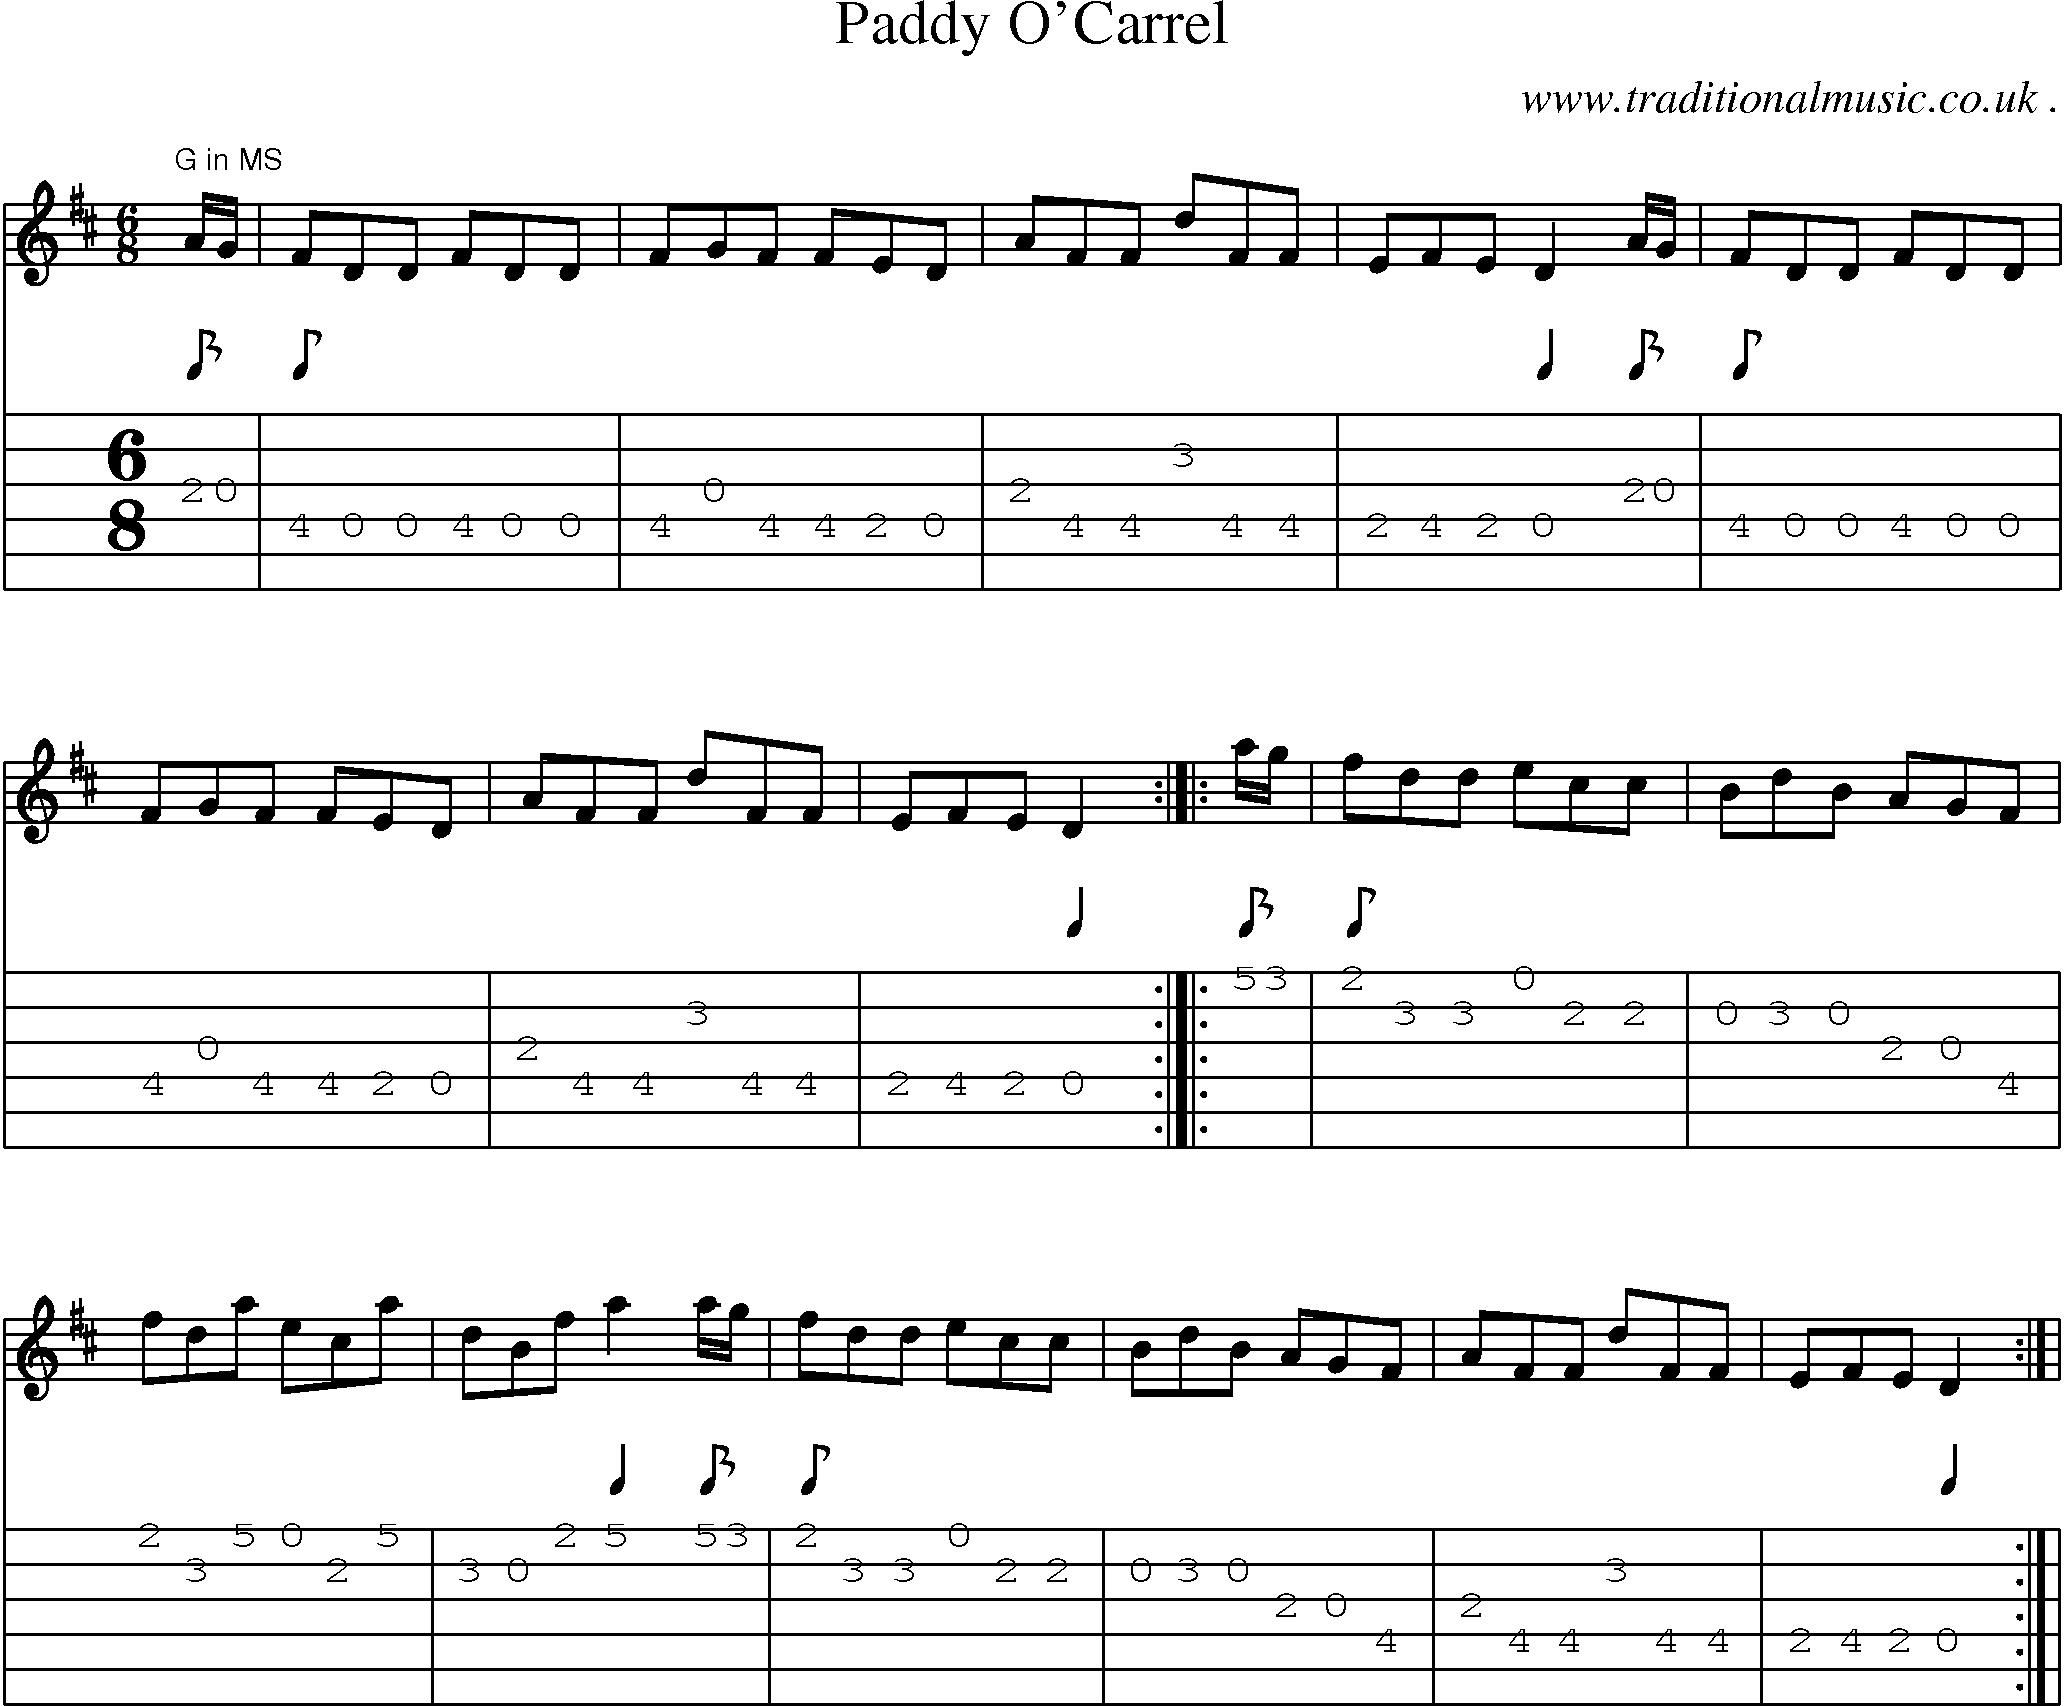 Sheet-Music and Guitar Tabs for Paddy Ocarrel